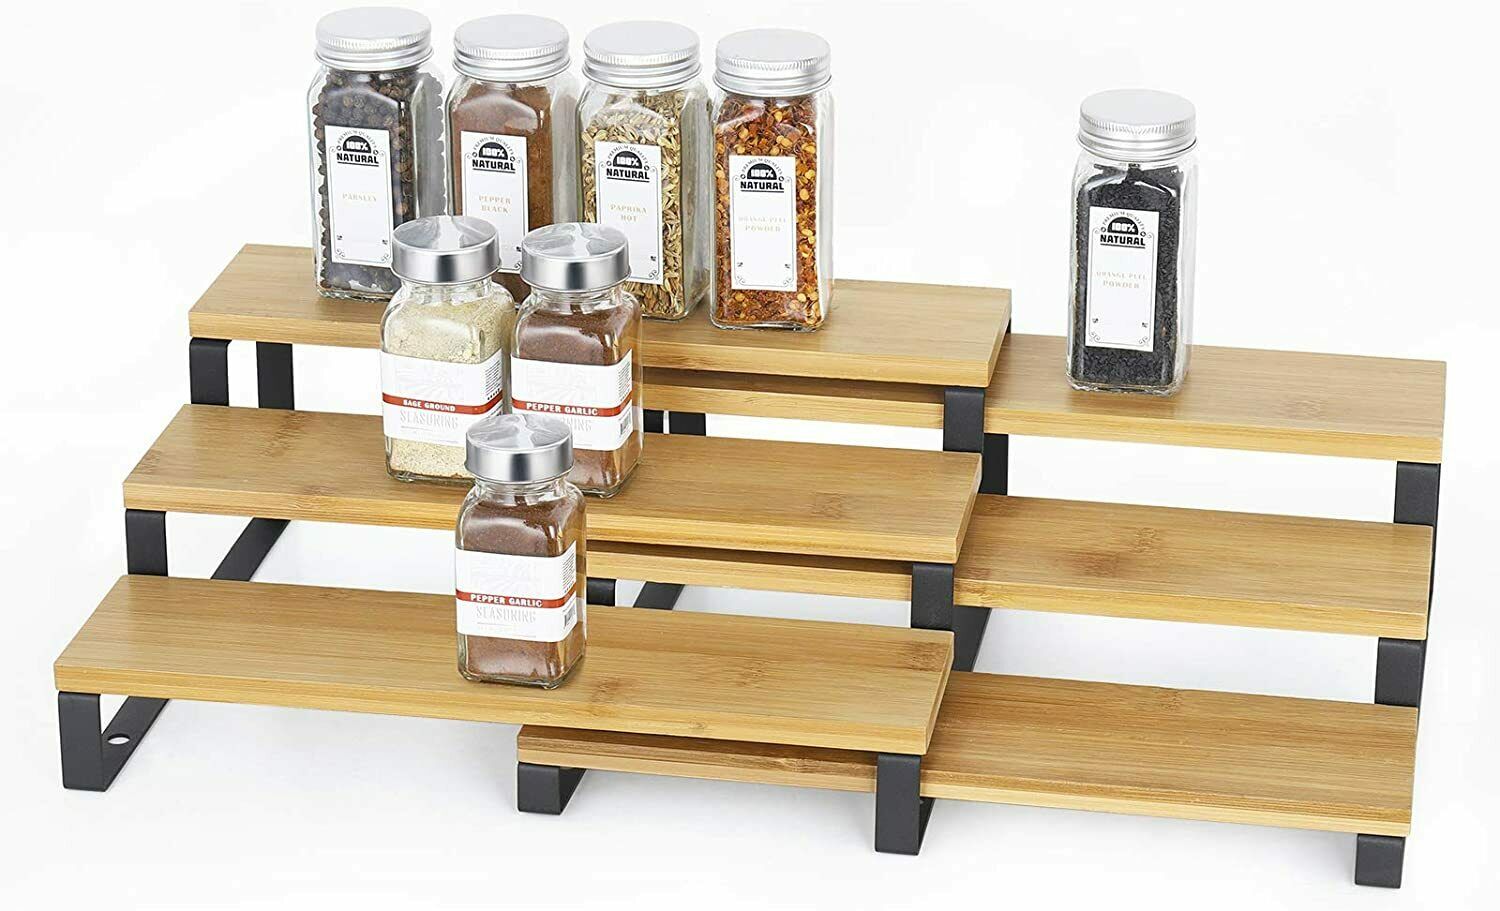 3 Tier Expandable Spice Rack Step Shelf Bamboo Organizer for Kitchen Cabinet